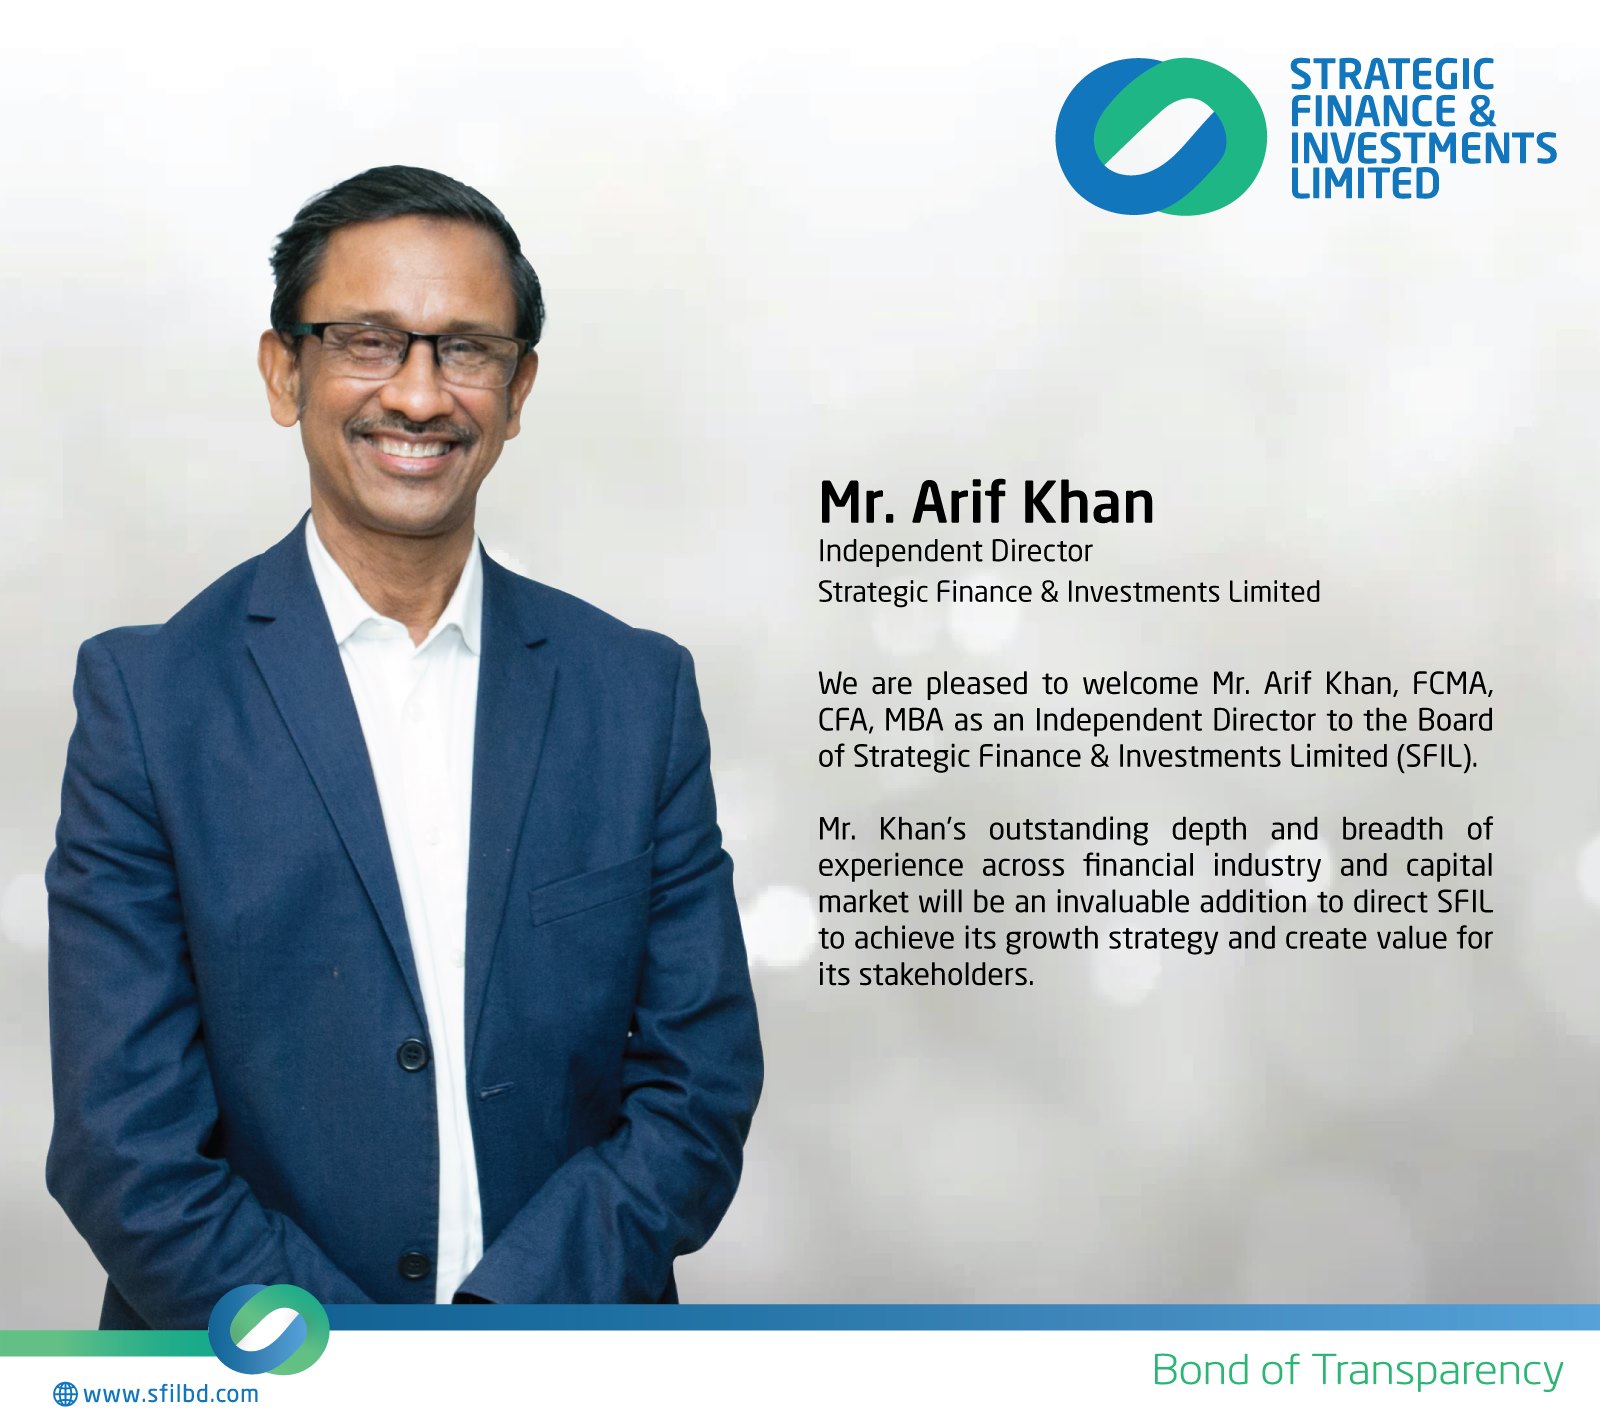 Mr. Arif Khan, FCMA, CFA, MBA as an Independent Director to the Board of Strategic Finance & Investments Limited (SFIL)